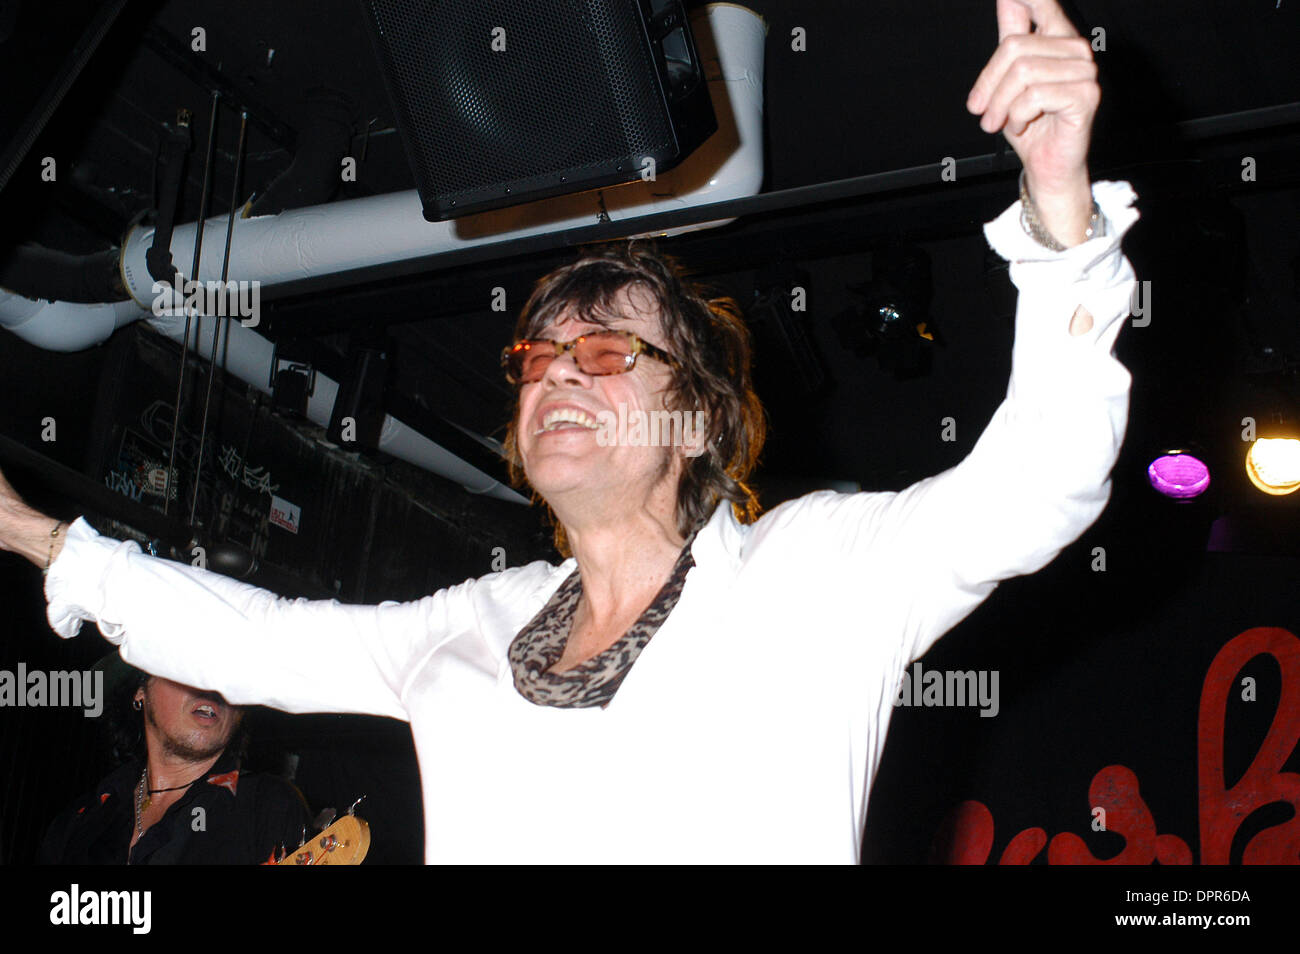 May 05, 2009 - New York, New York, USA - New York Dolls performing at The John Varvatos store in ew York. DAVID JOHANSEN - lead vocals, SYLVAIN SYLVAIN -on guitar with hat and STEVE CONTE - on guitar. (Credit Image: © Aviv Small/ZUMA Press) Stock Photo